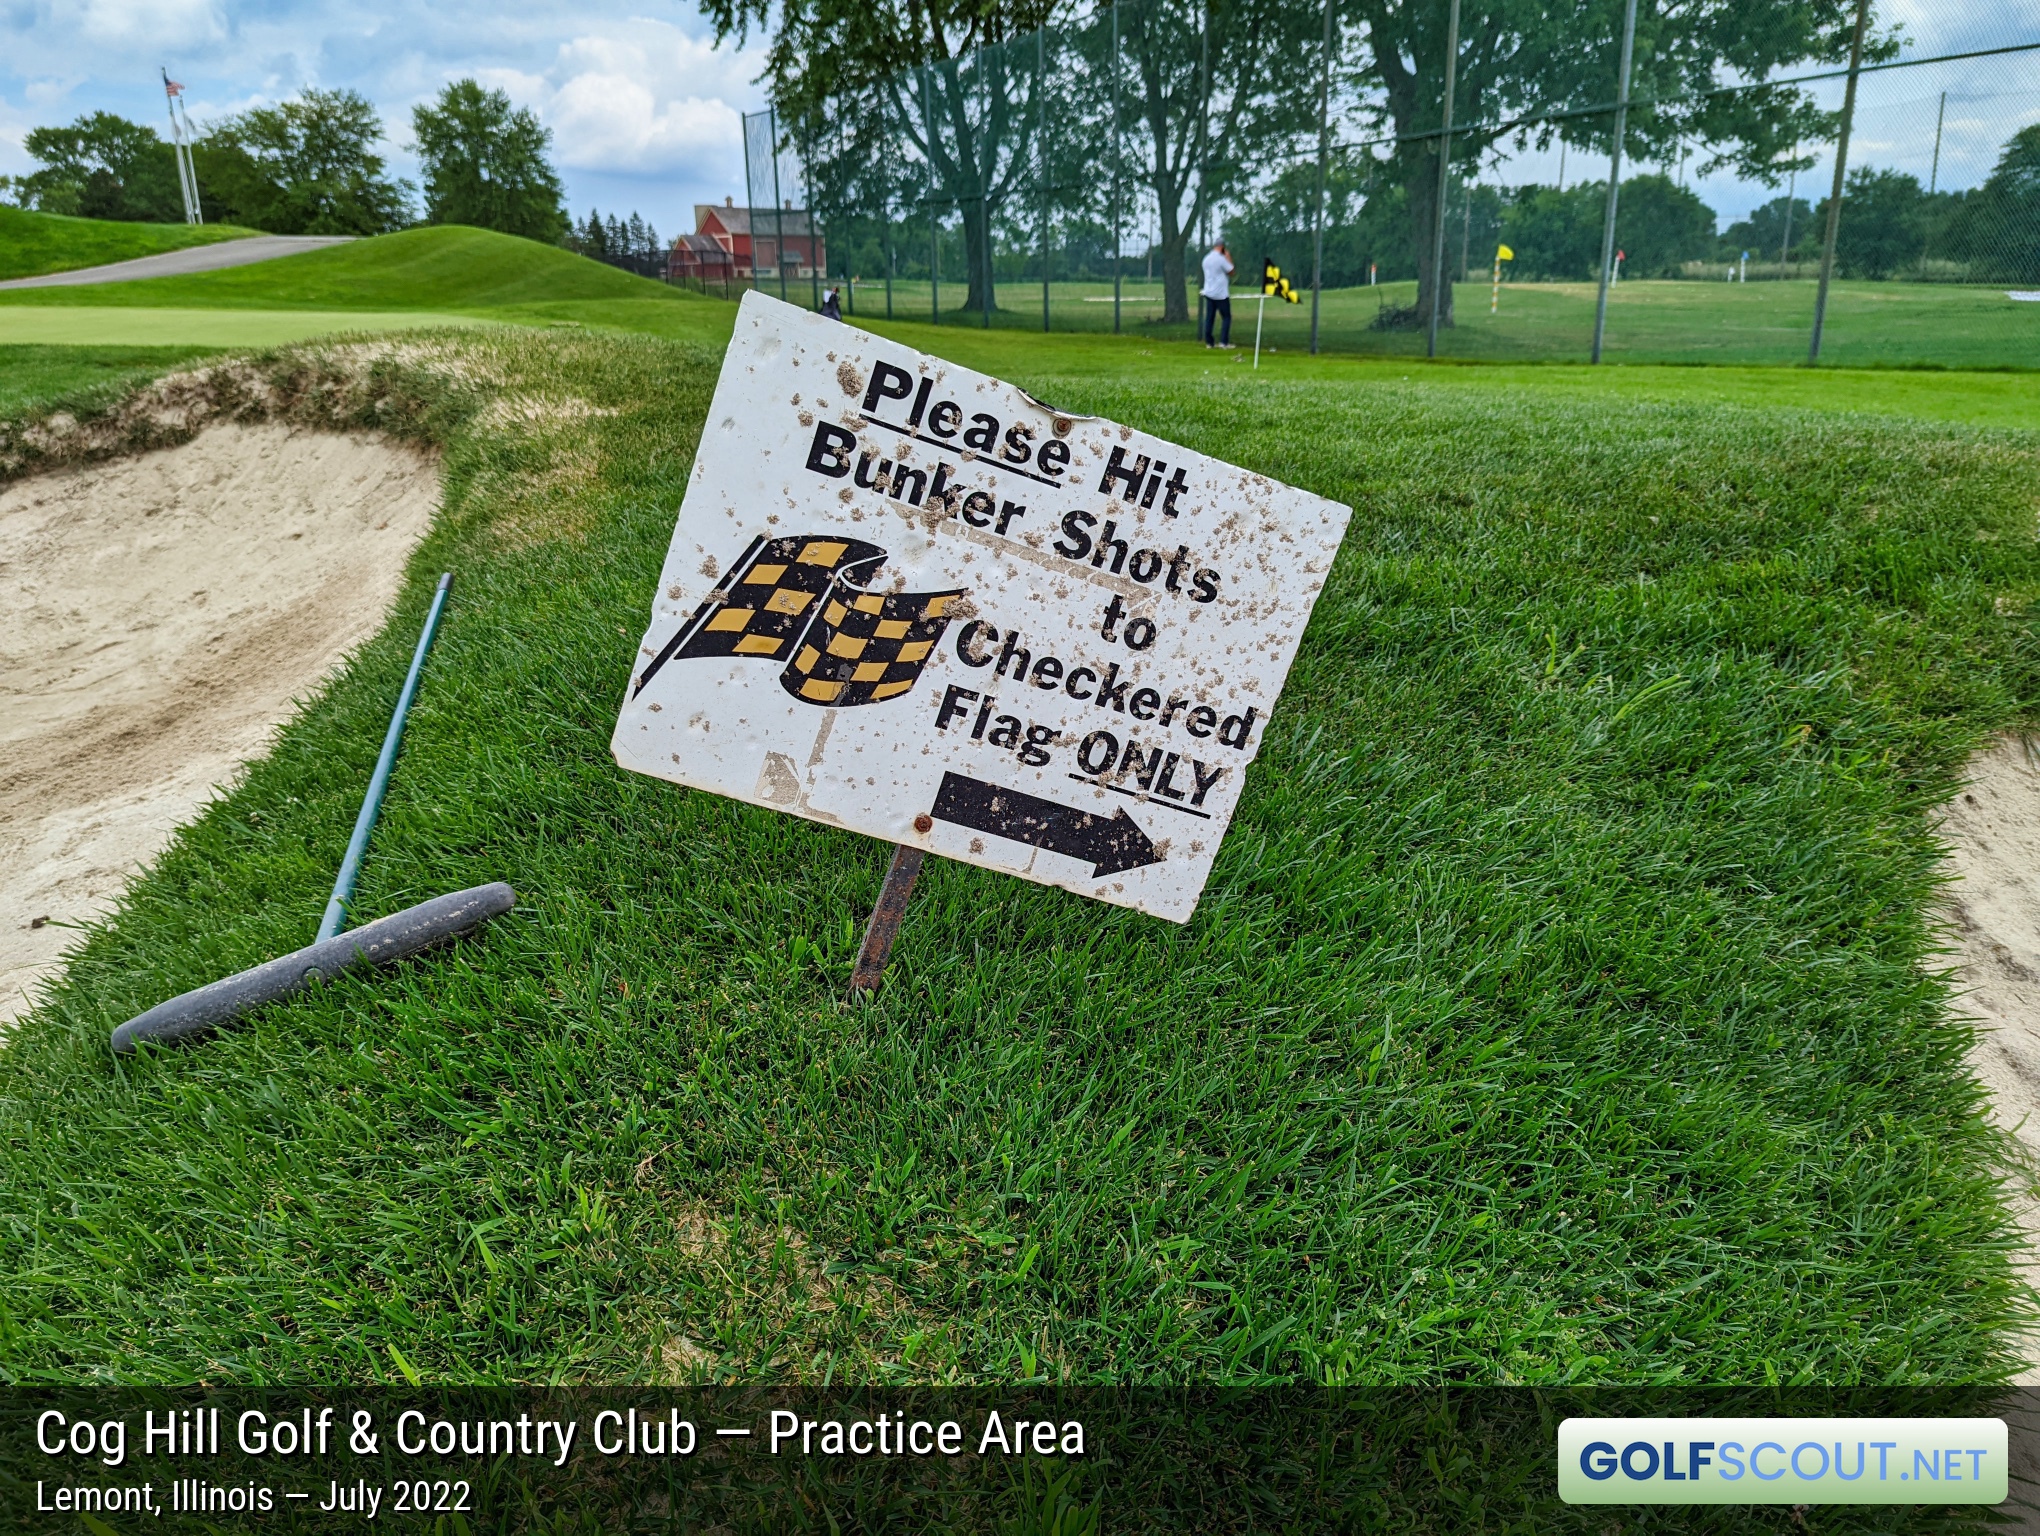 Photo of the practice area at Cog Hill Course #4 - Dubsdread in Lemont, Illinois. "Please hit bunker shots to checkered flag ONLY"